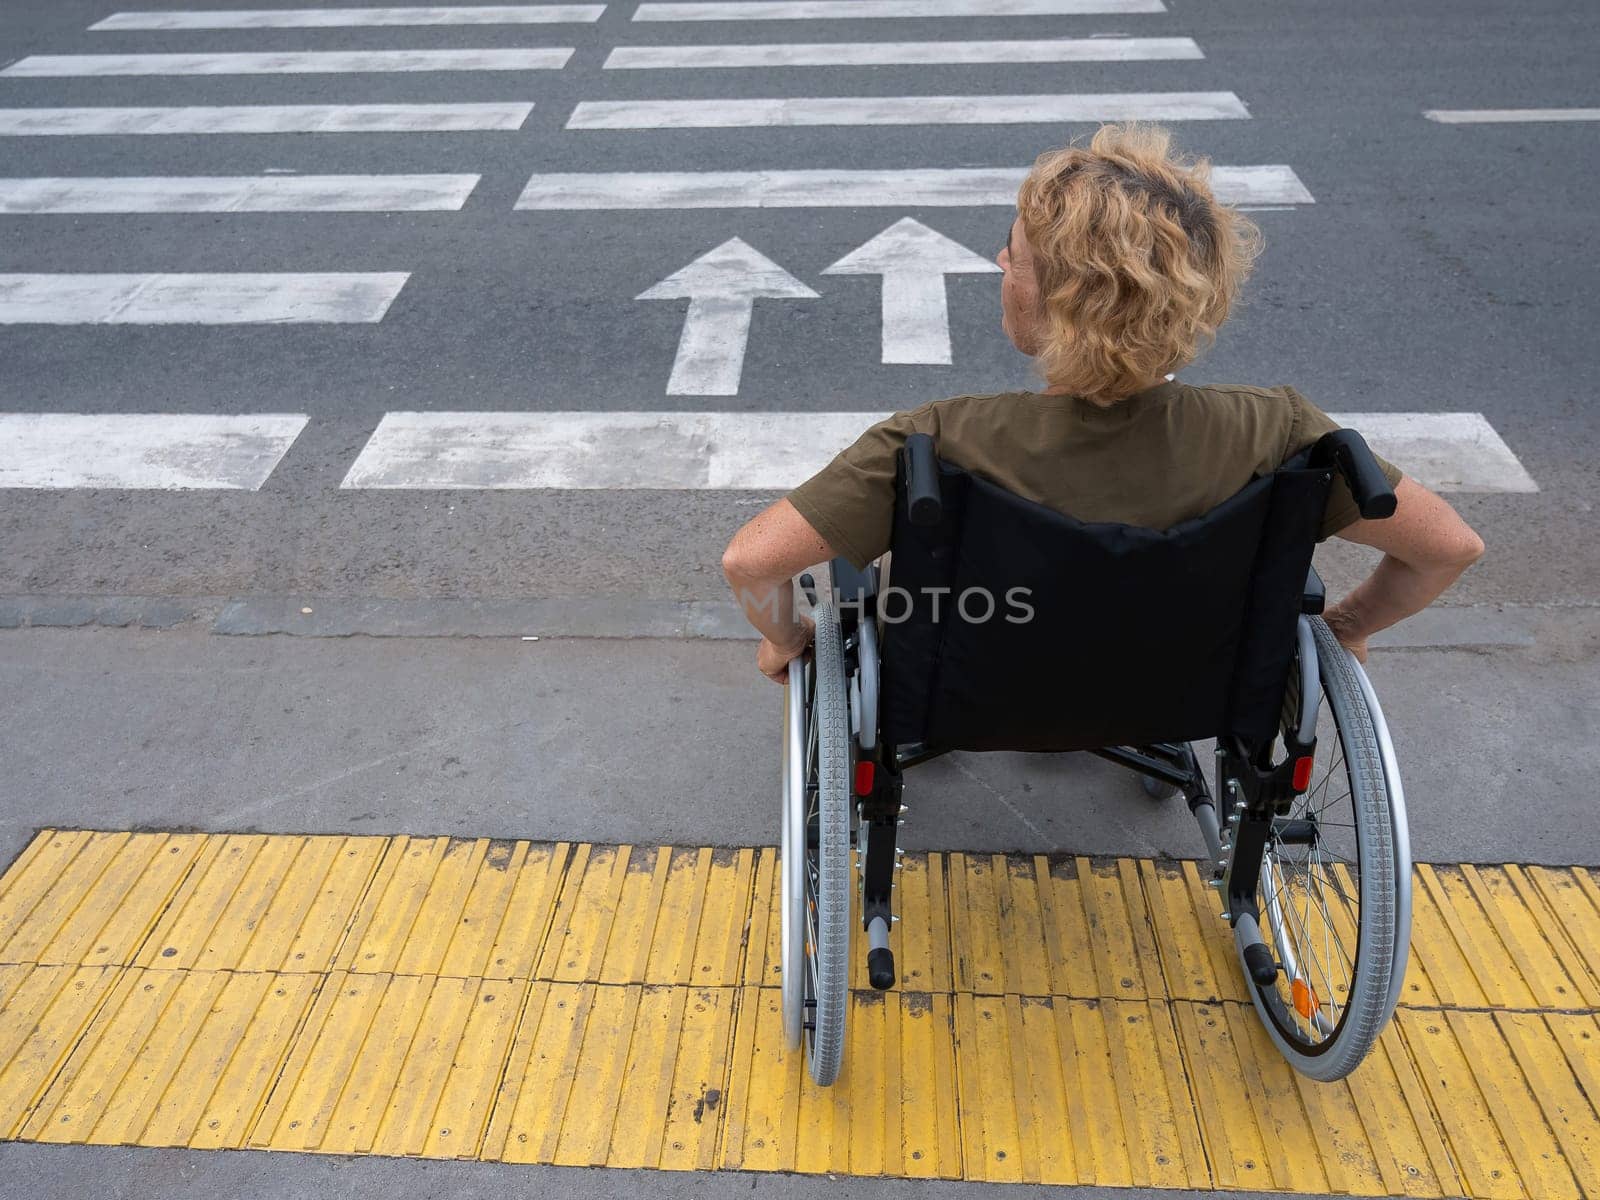 Rear view of an elderly woman on a wheelchair going to a pedestrian crossing